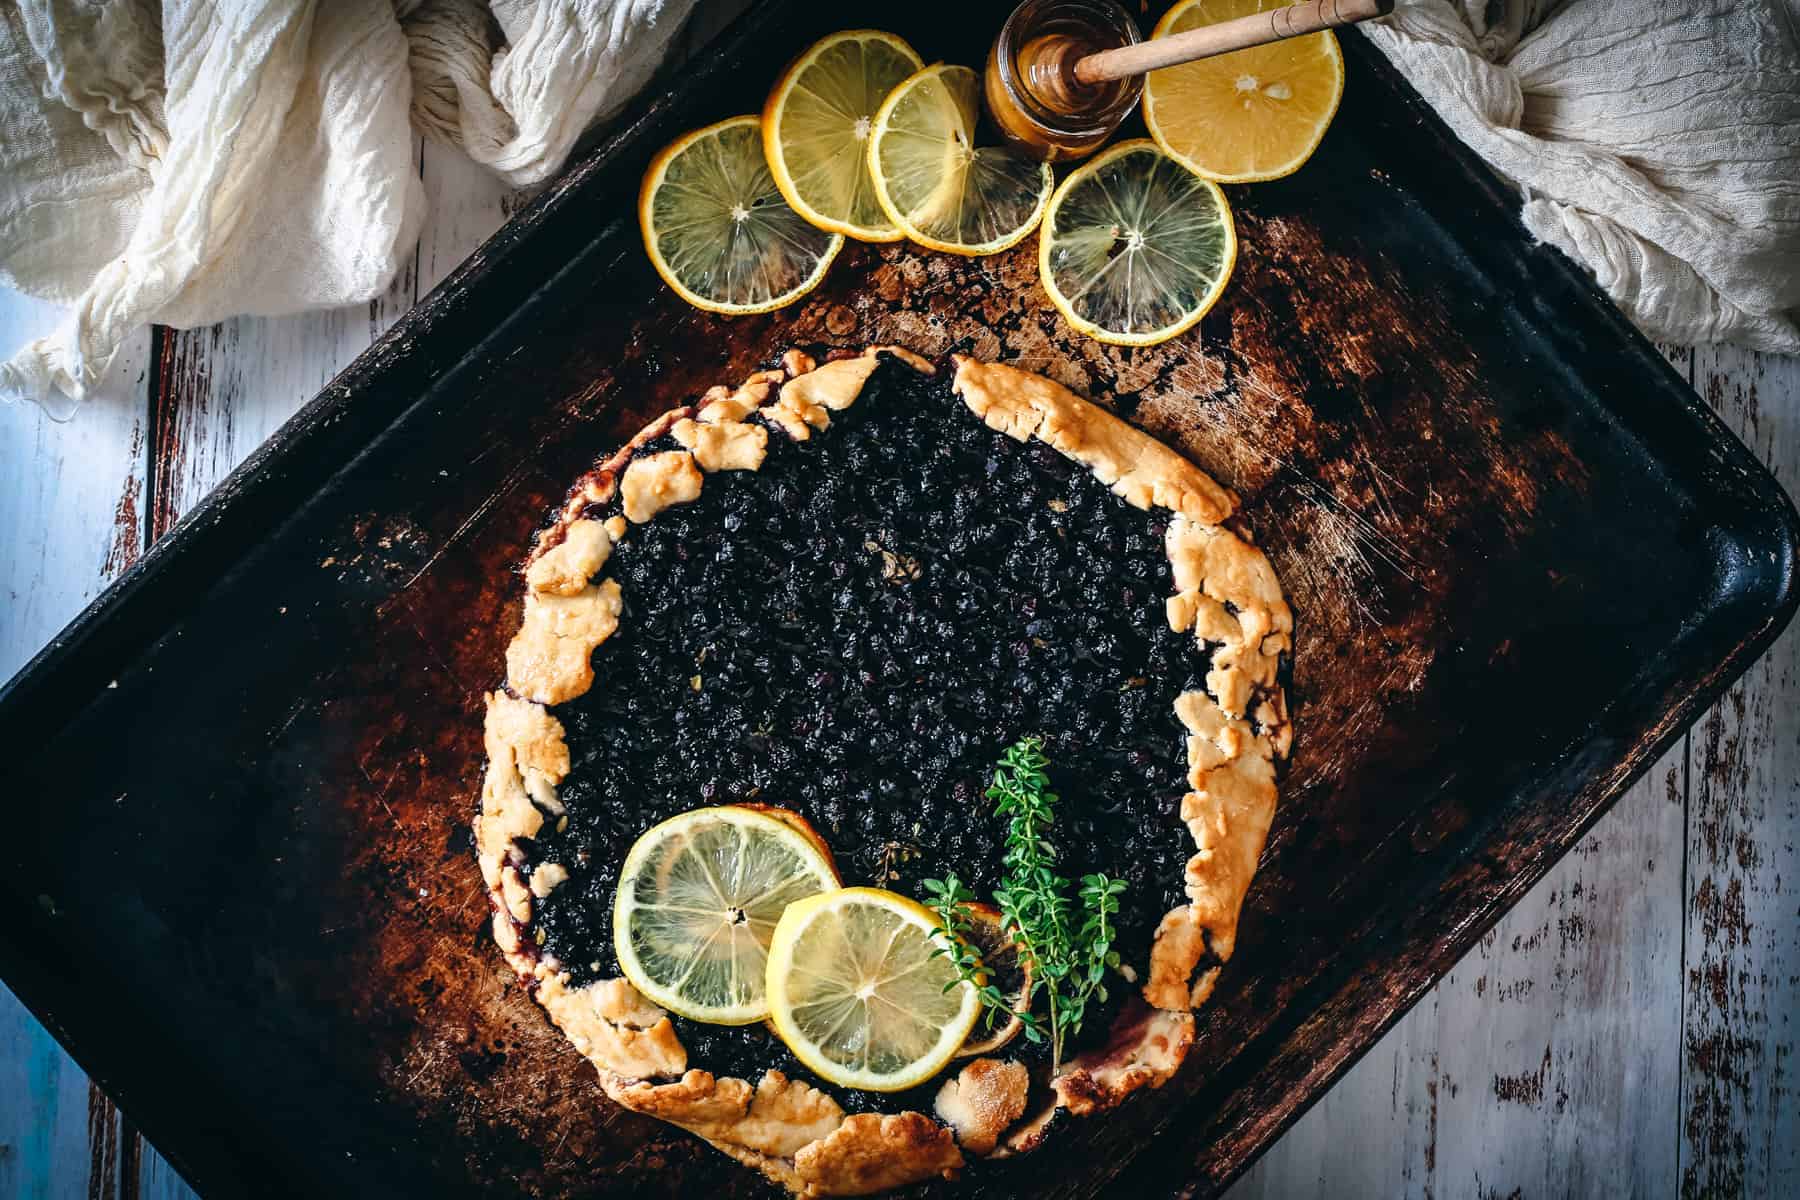 Blueberry galette with lemon slices on top.